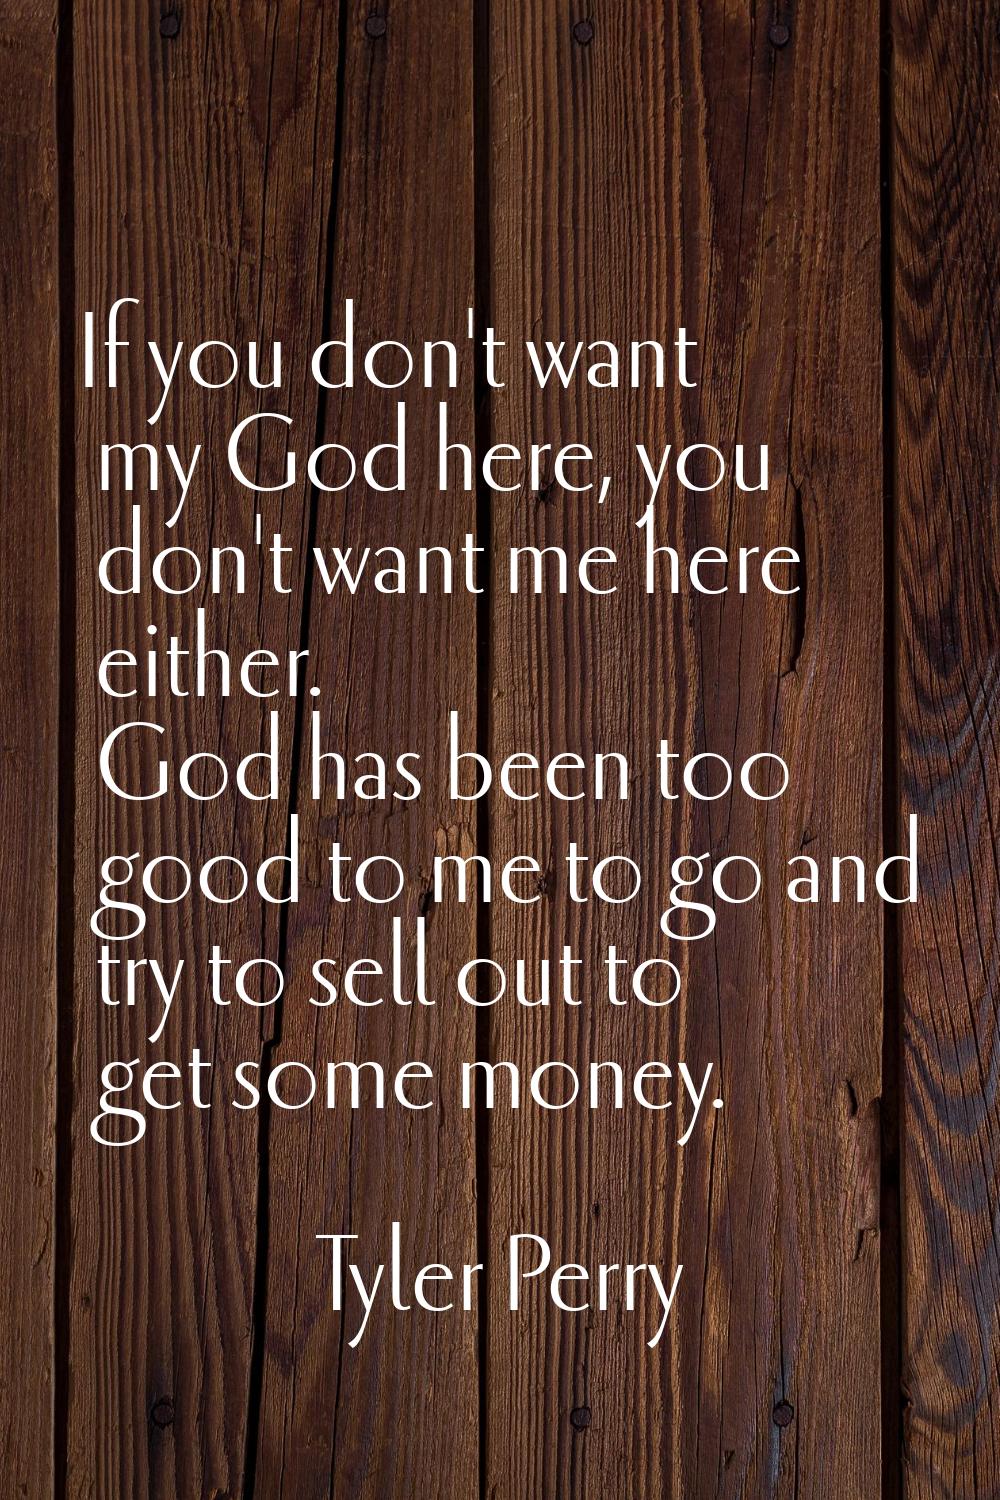 If you don't want my God here, you don't want me here either. God has been too good to me to go and